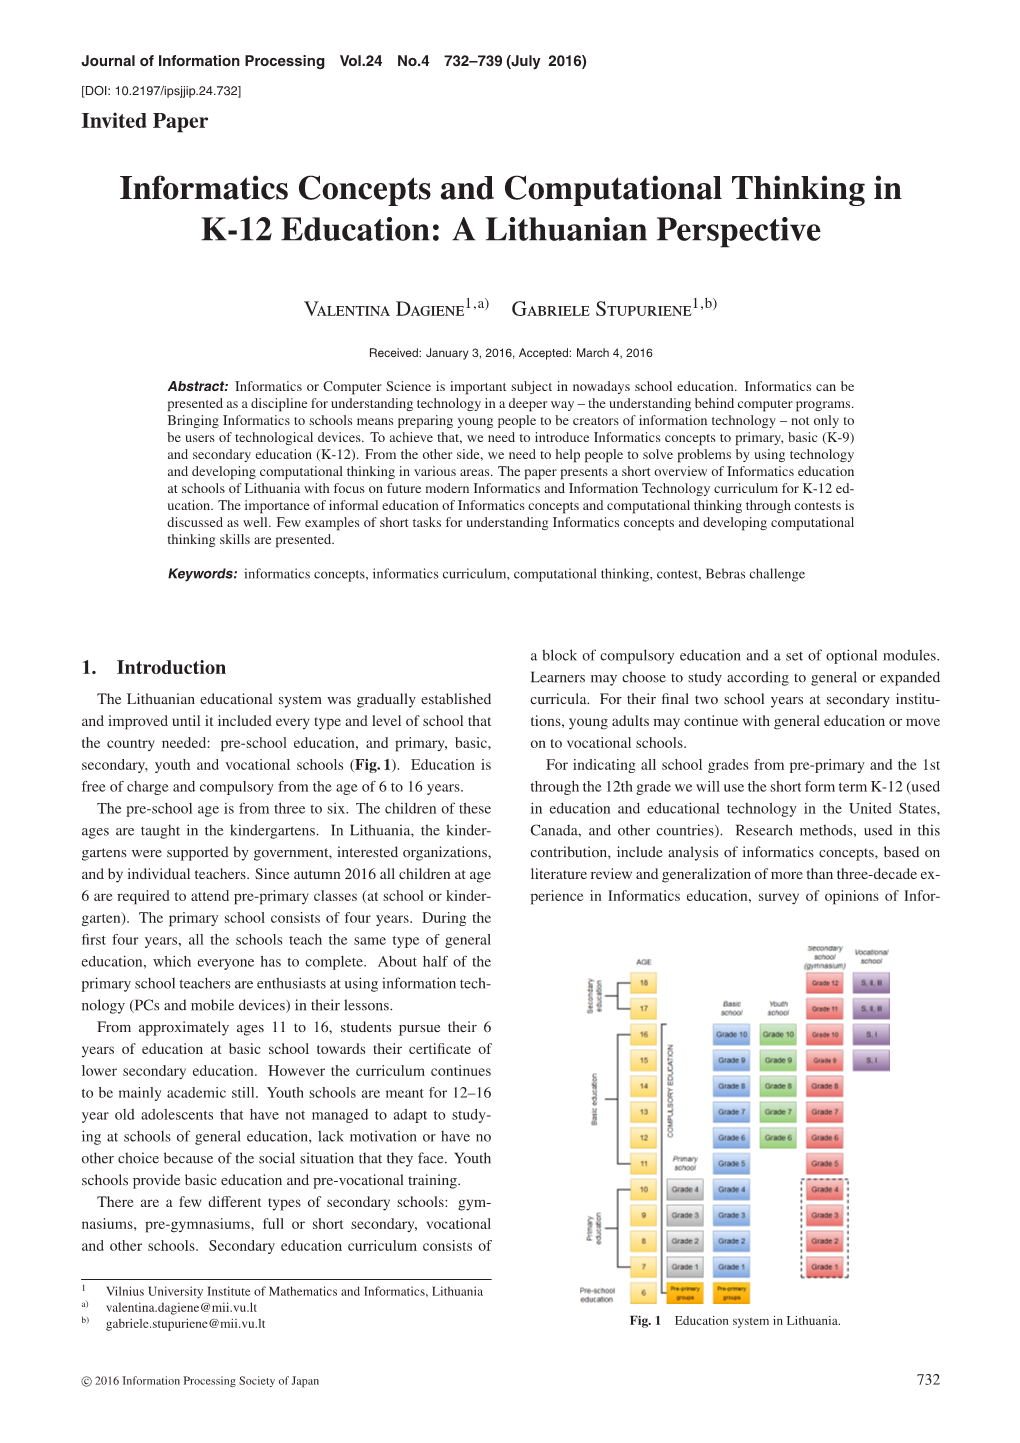 Informatics Concepts and Computational Thinking in K-12 Education: a Lithuanian Perspective